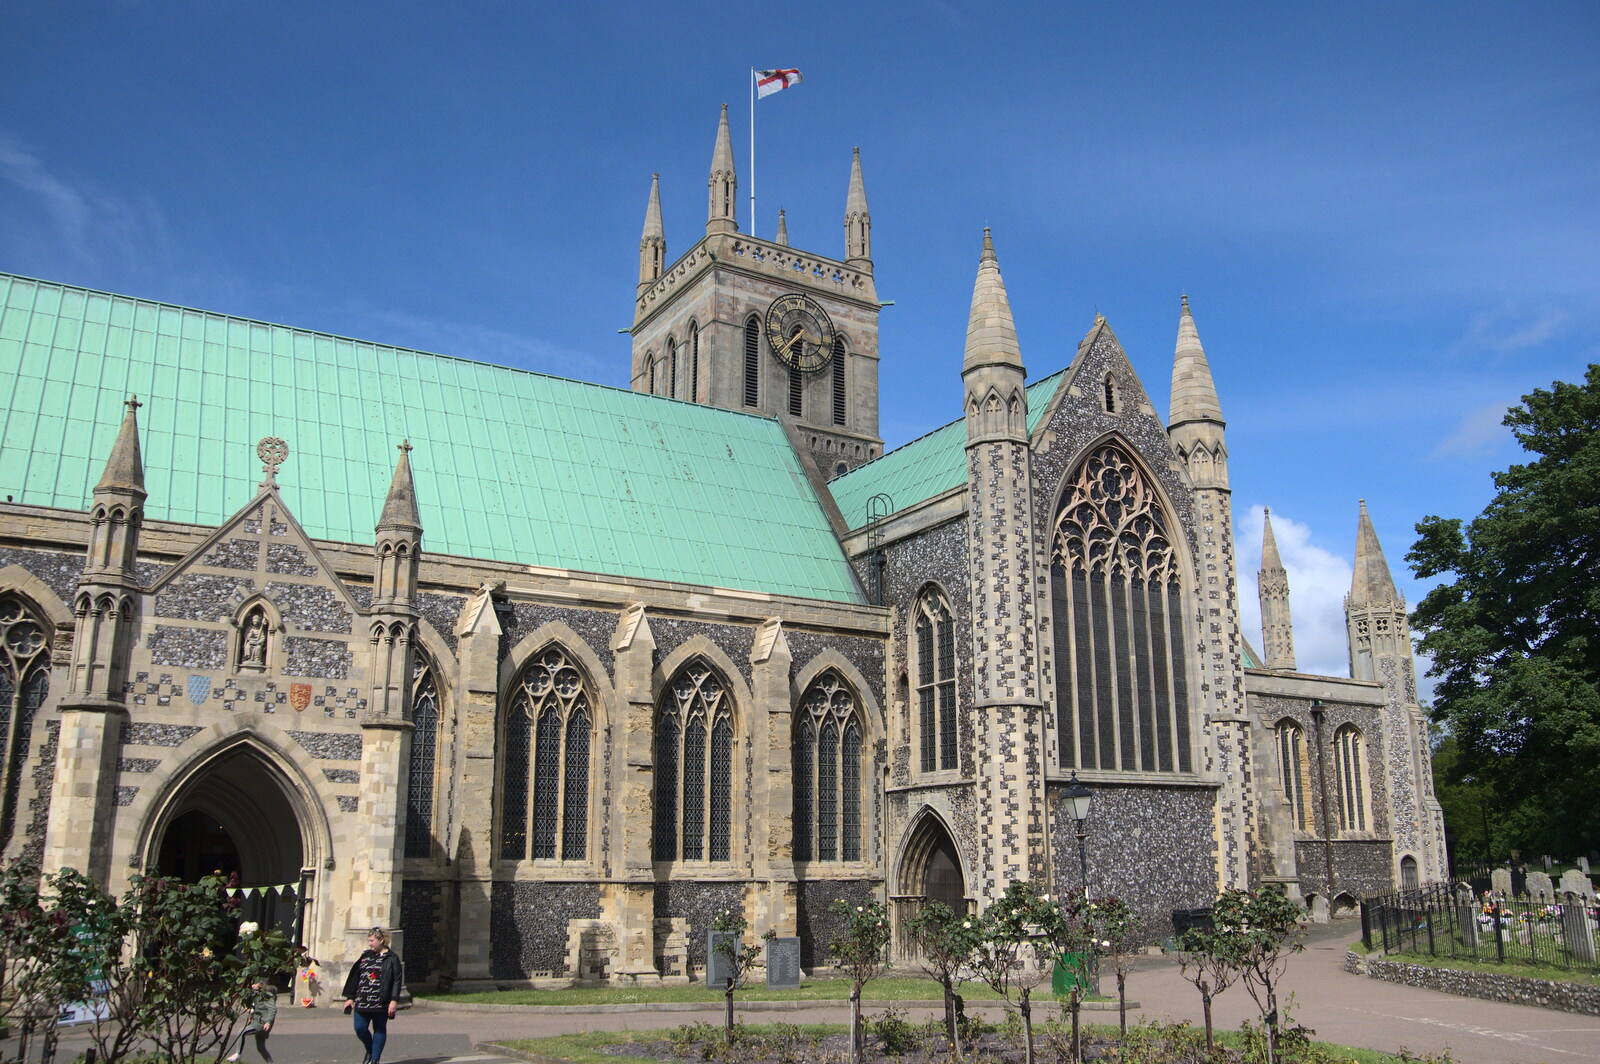 Great Yarmouth Minster from Faded Seaside Glamour: A Weekend in Great Yarmouth, Norfolk - 29th May 2022